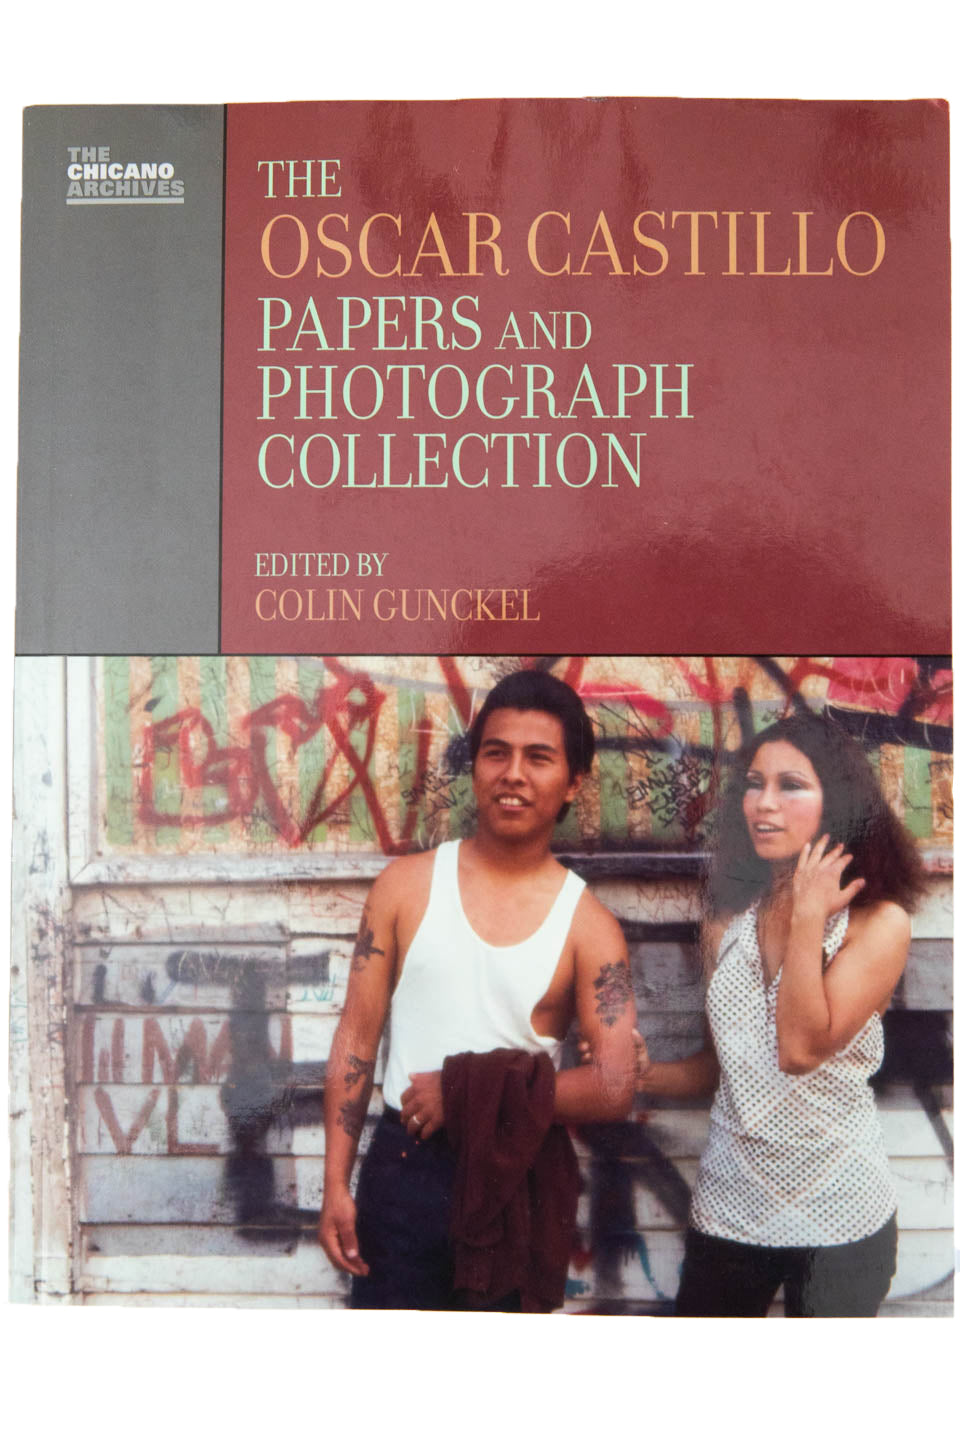 THE OSCAR CASTILLO PAPERS AND PHOTOGRAPH COLLECTION